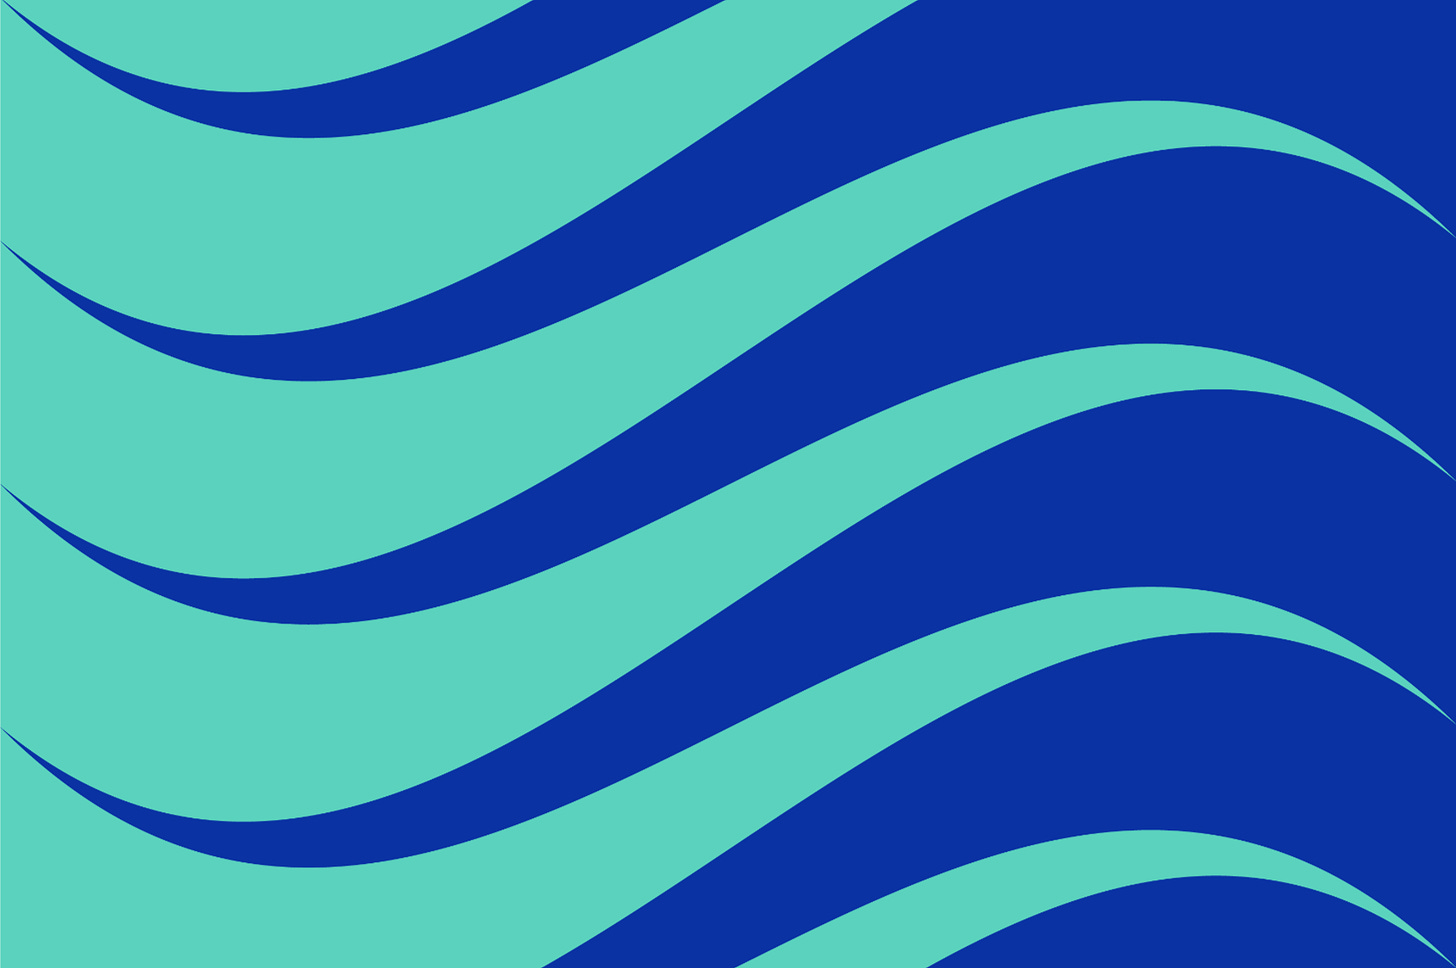 Community (sea-green) Symbolising the existing community that has used this colour for stuttering awareness since 2009.  Nature (wave motif) Symbolising stuttering as a natural, varied phenomenon.  Liberation (ultramarine) Symbolising the progress and passion of the stuttering pride movement.